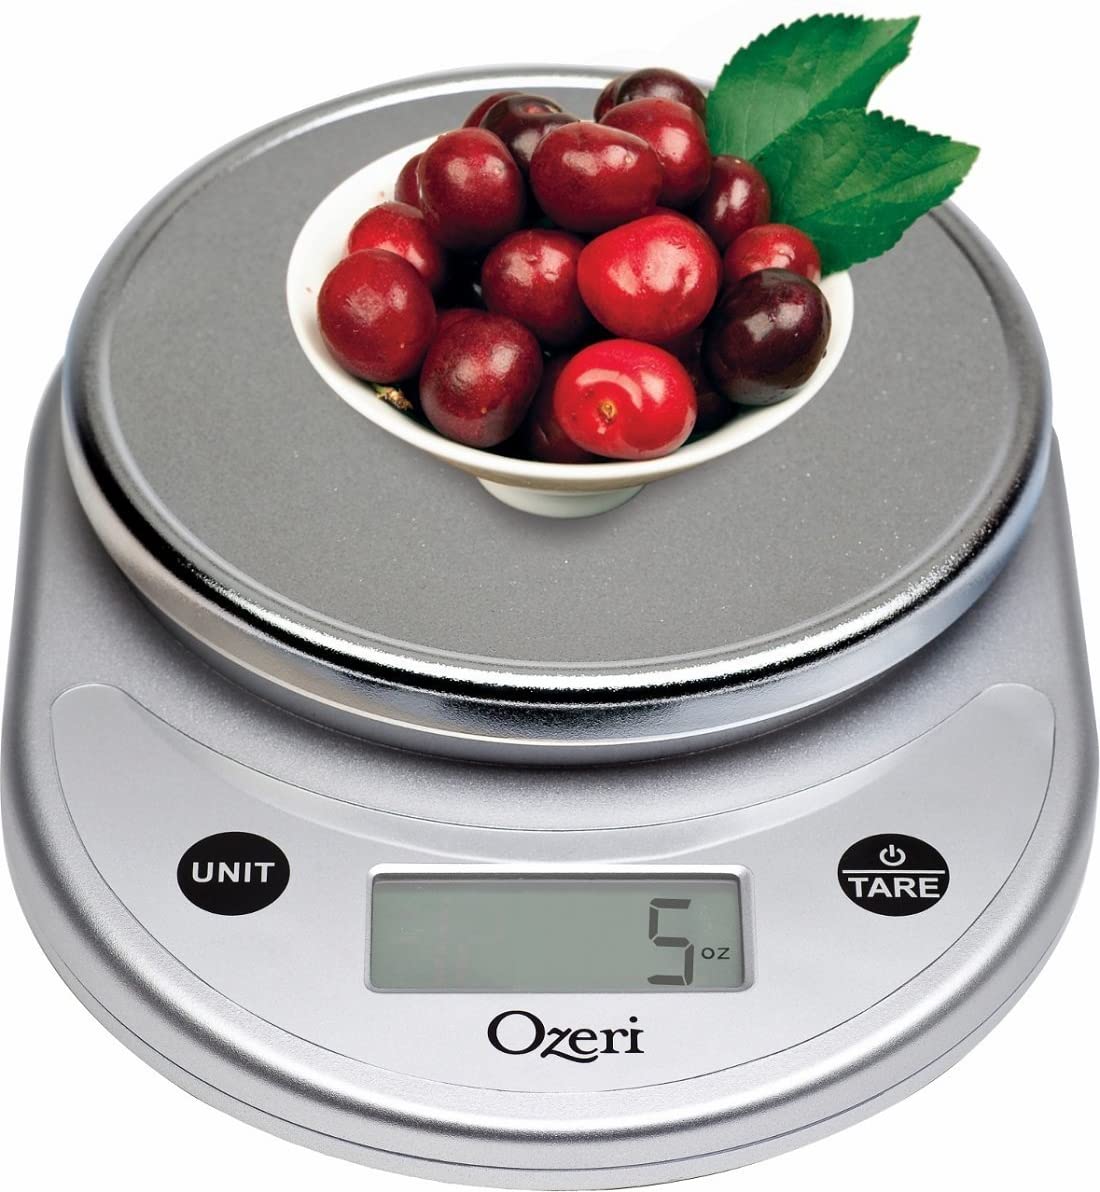 Digital Multifunction Kitchen and Food Scale $13.99 (REG $39.99)